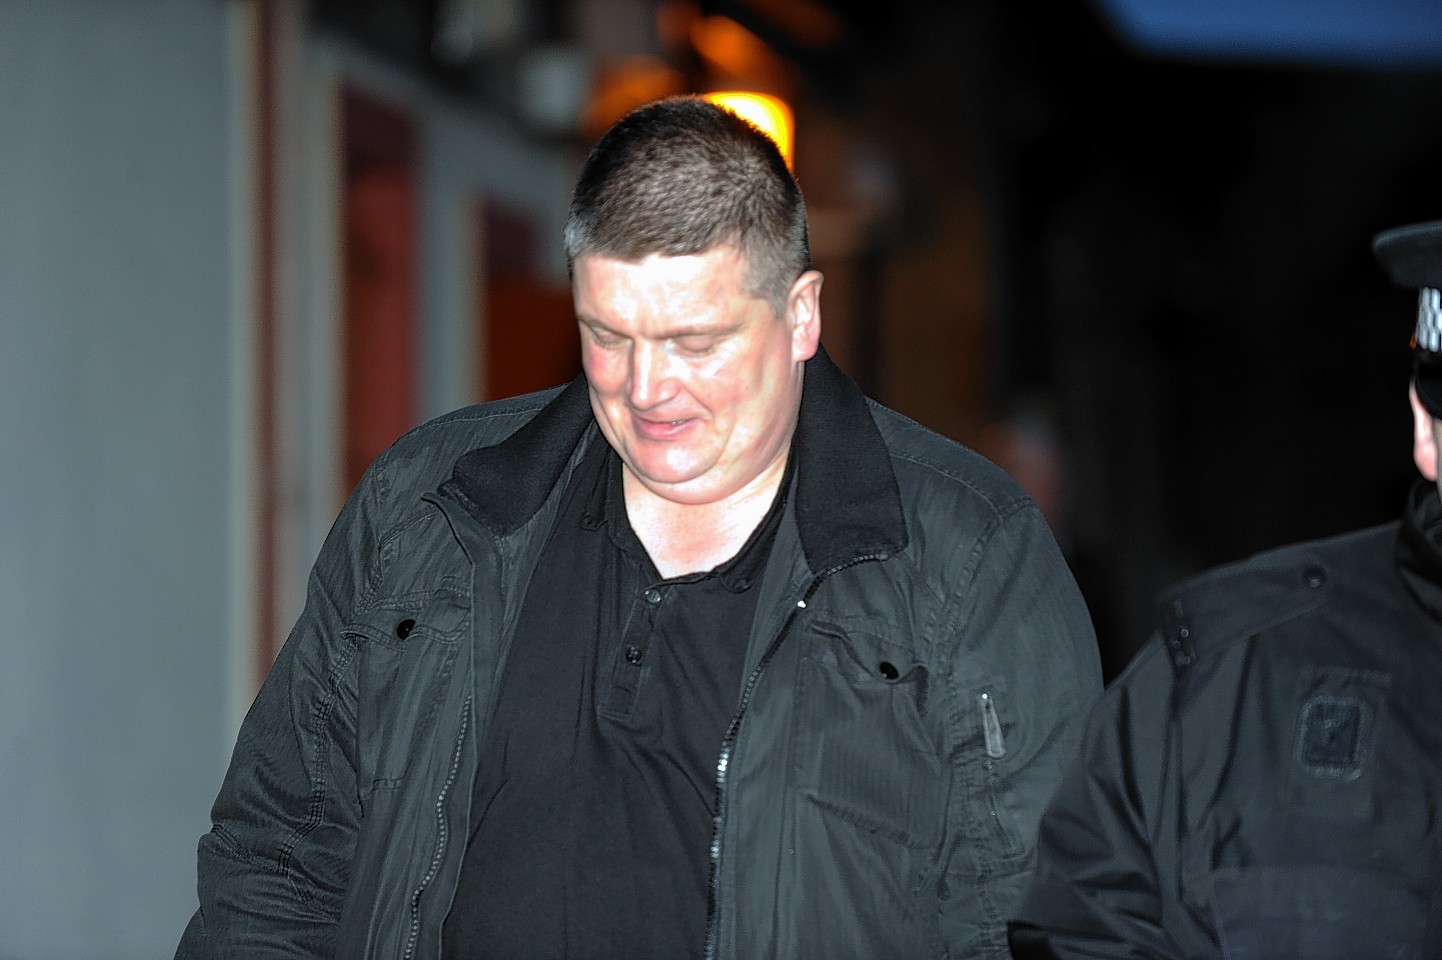 Steven Whitecross was  placed on the sex offenders register for three years.